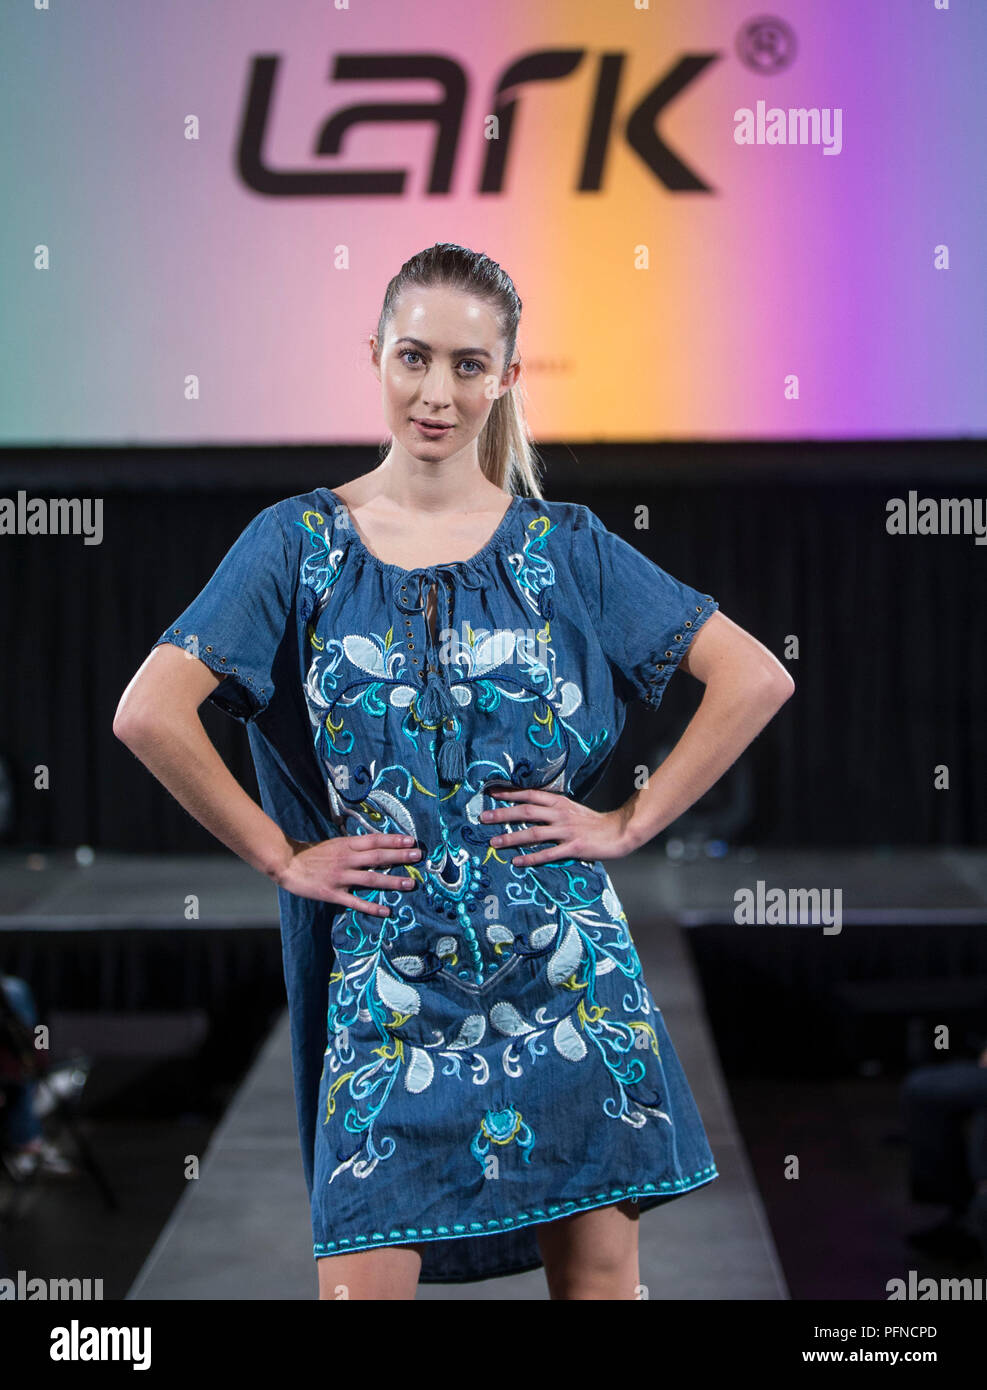 Toronto, Canada. 21st Aug, 2018. A model presents a creation during the Brand China fashion show of the 2018 Apparel Textile Sourcing Canada Trade Show at the International Center in Toronto, Canada, Aug. 21, 2018. Credit: Zou Zheng/Xinhua/Alamy Live News Stock Photo